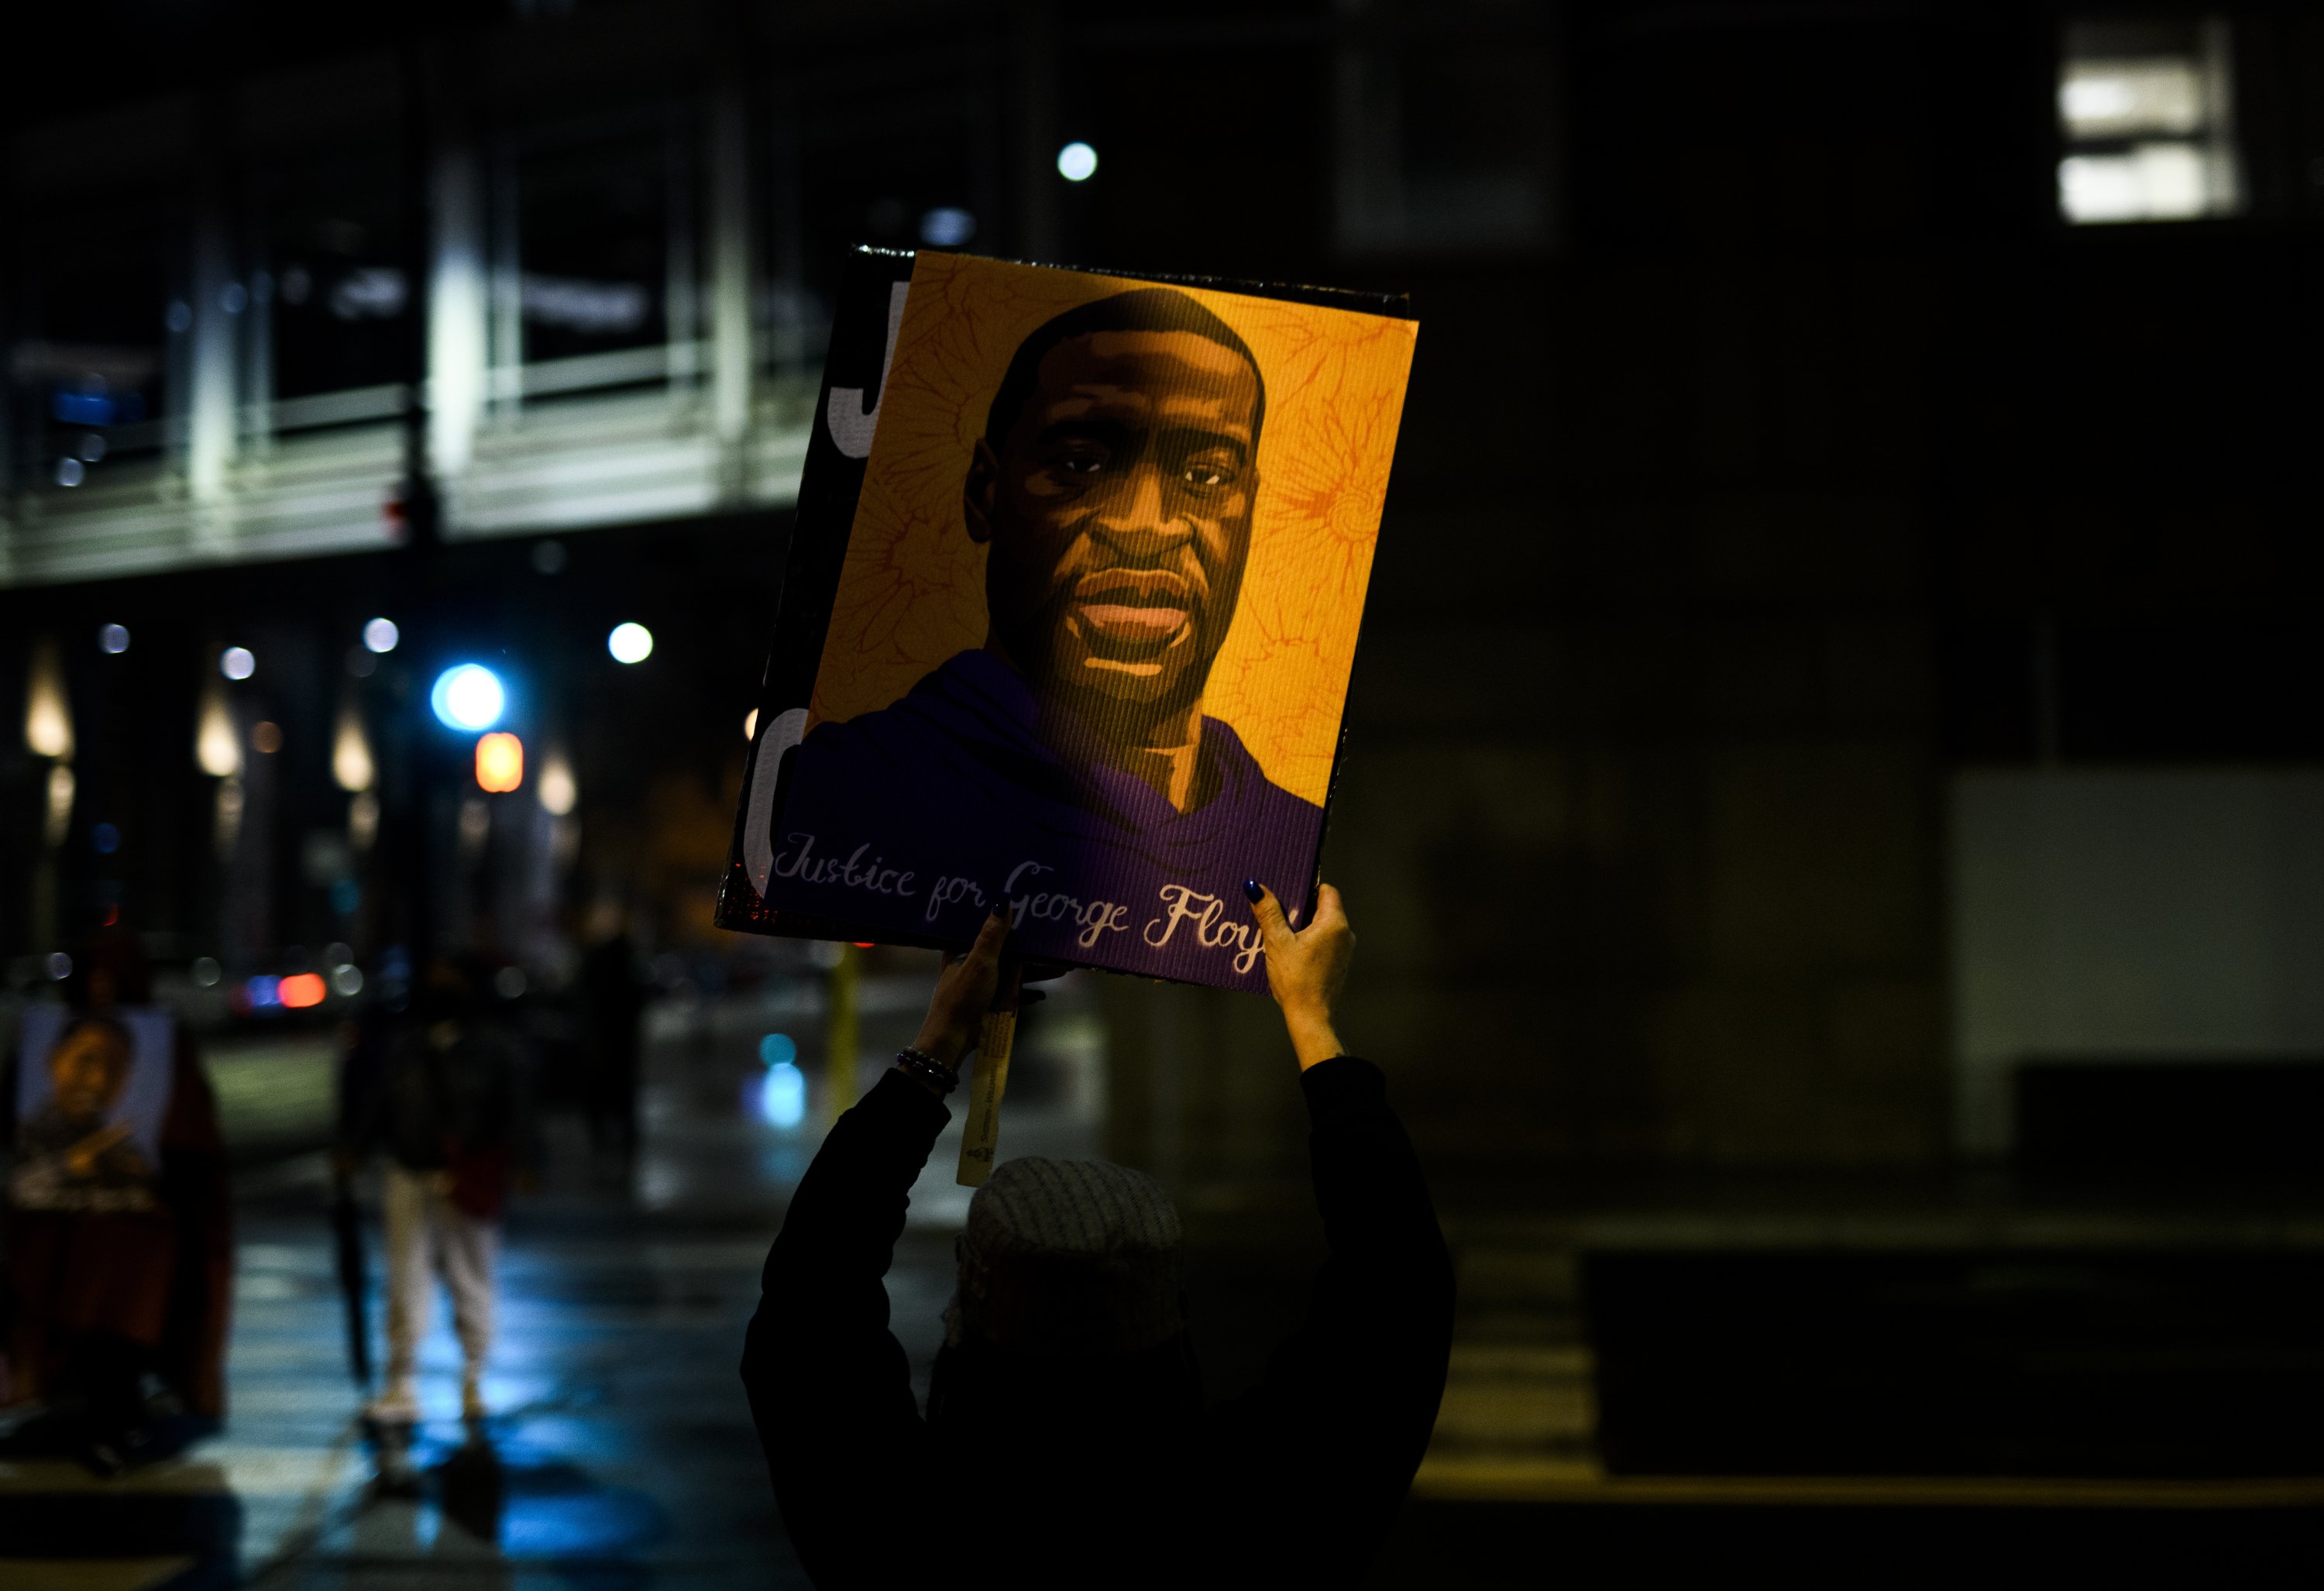 A woman holds up a portrait of George Floyd as people gather outside the Hennepin County Government Center to demand justice for his murder, in Minneapolis, Minnesota, U.S., April 9, 2021. (Photo by Getty Images)